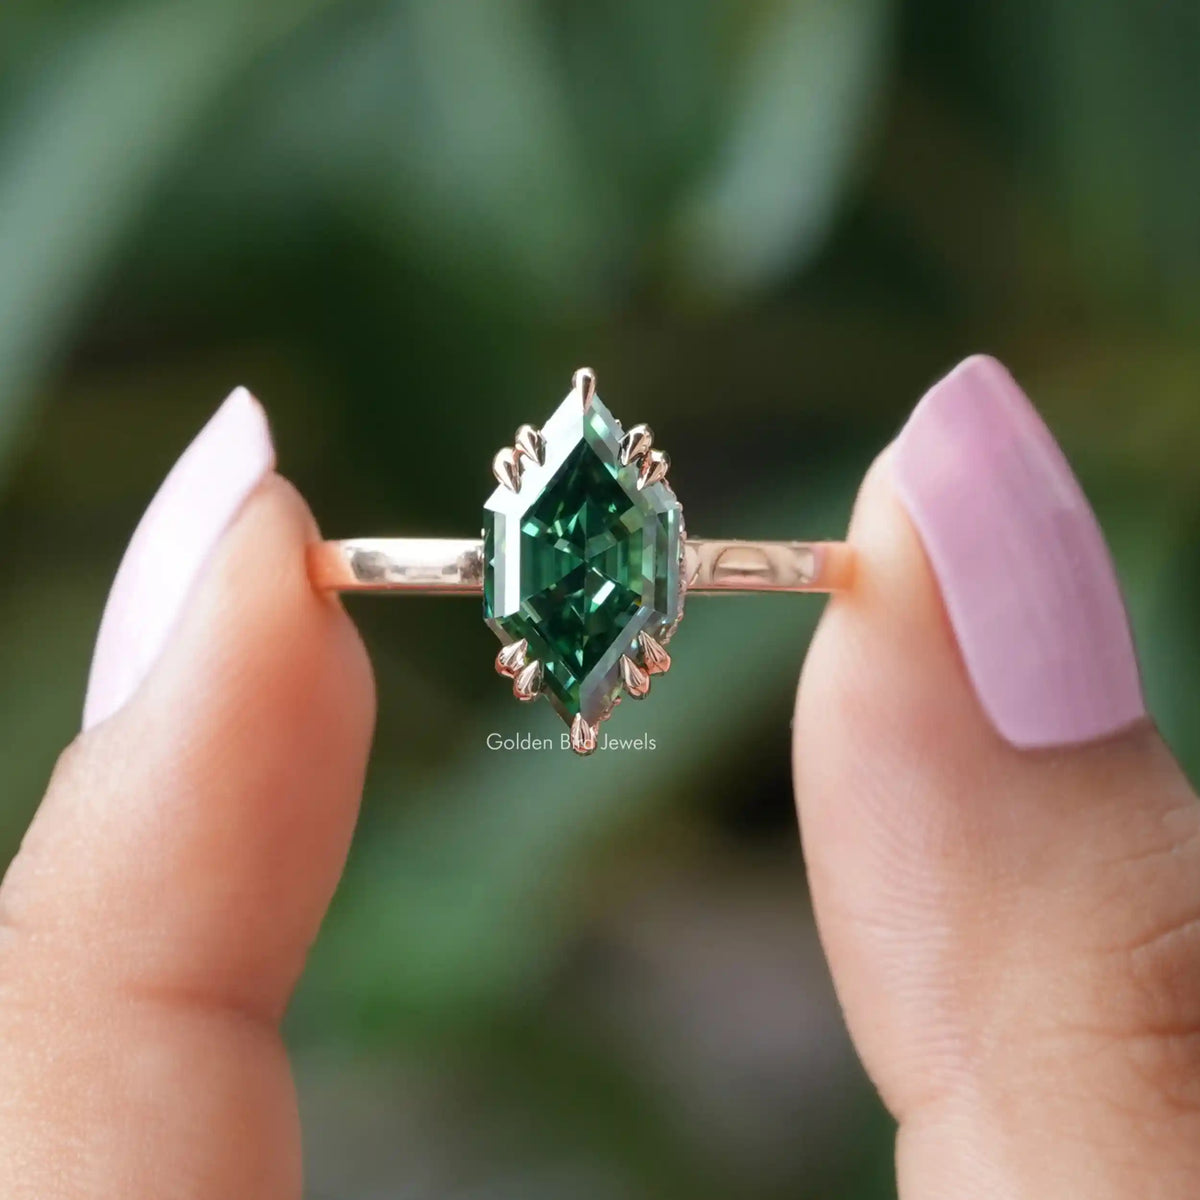 [Green Dutch Marquise Cut Solitaire Ring In 14k Yellow Gold]-[Golden Bird Jewels]